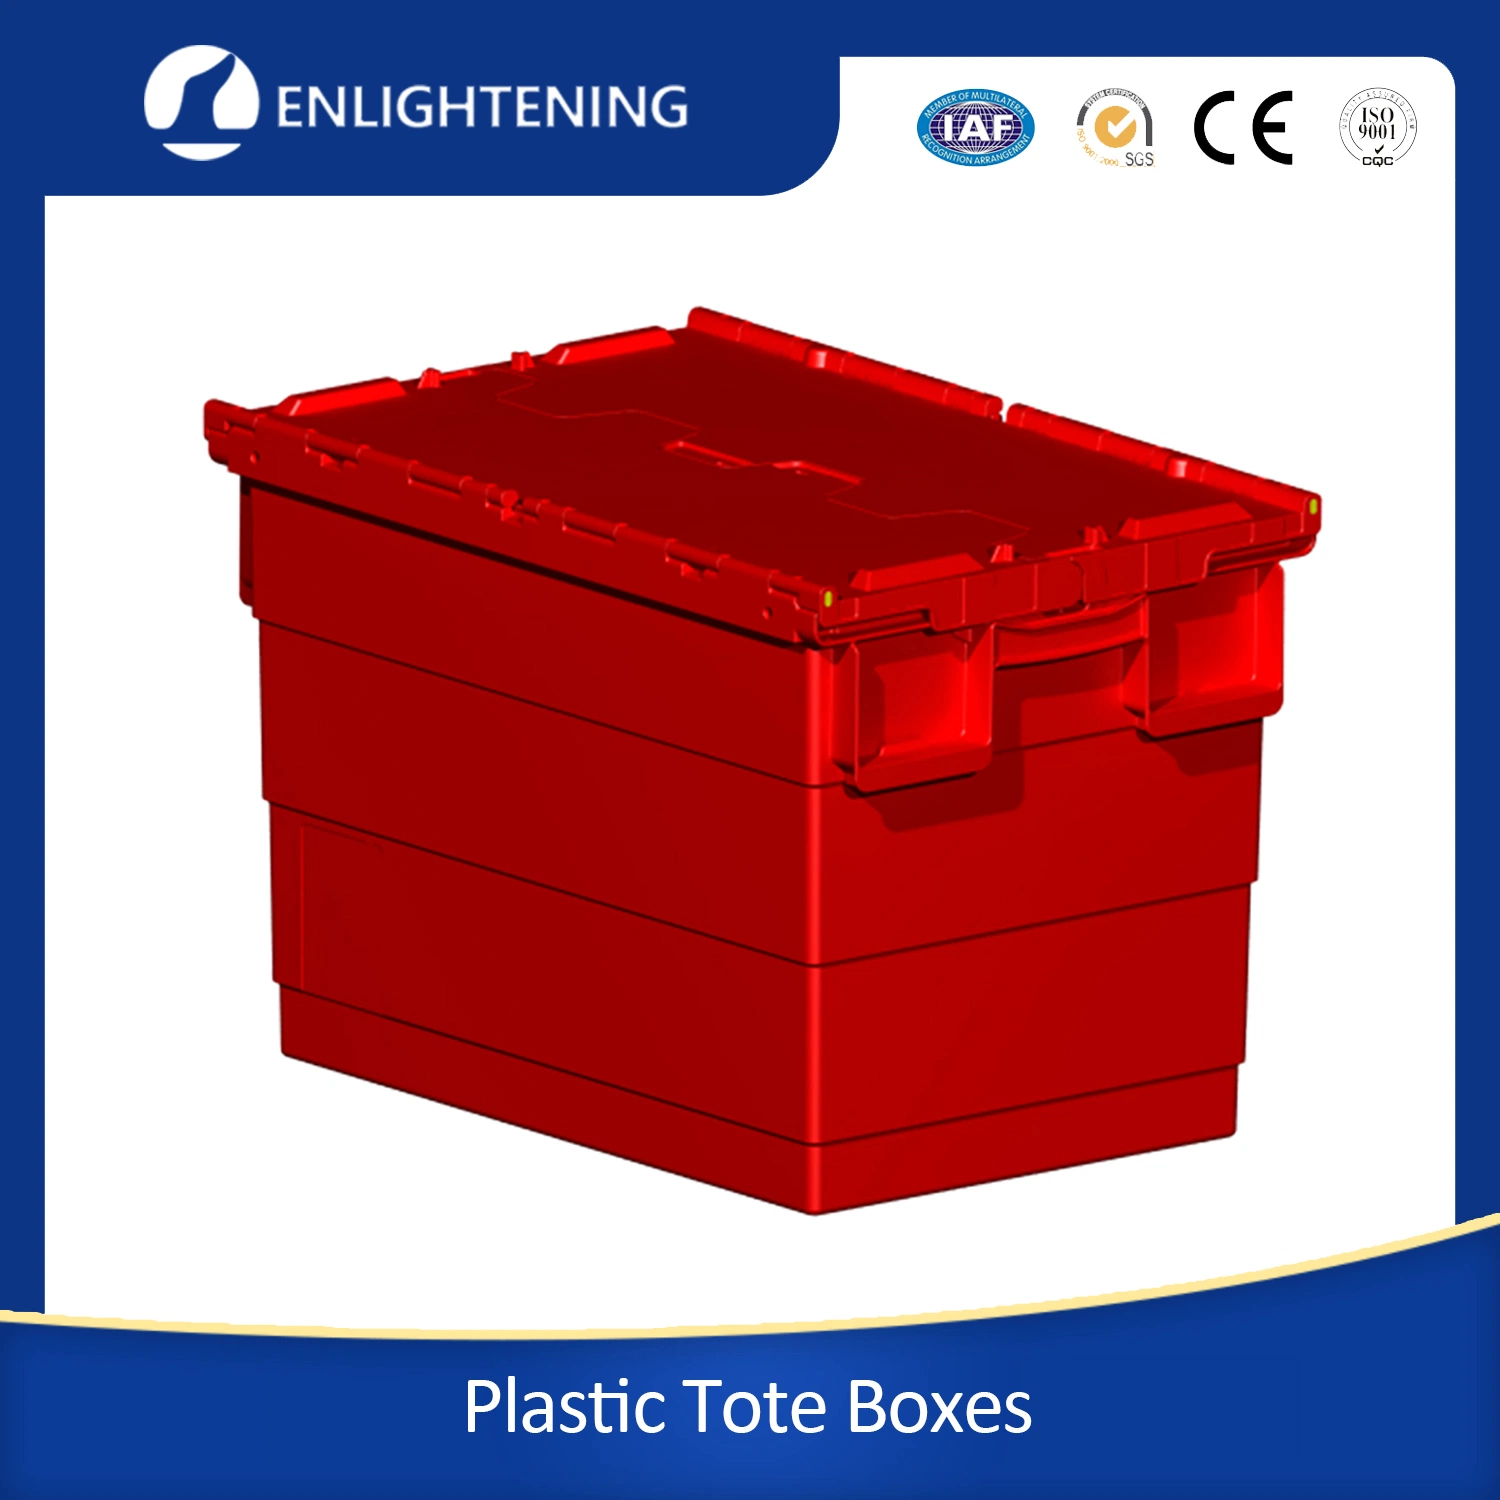 Plastic Durable Use Turnover Box /Hinge Lid Moving Container /Extra Strong Tote Boxesnestable Container Plastic Tote Box for Store storage and Transfer